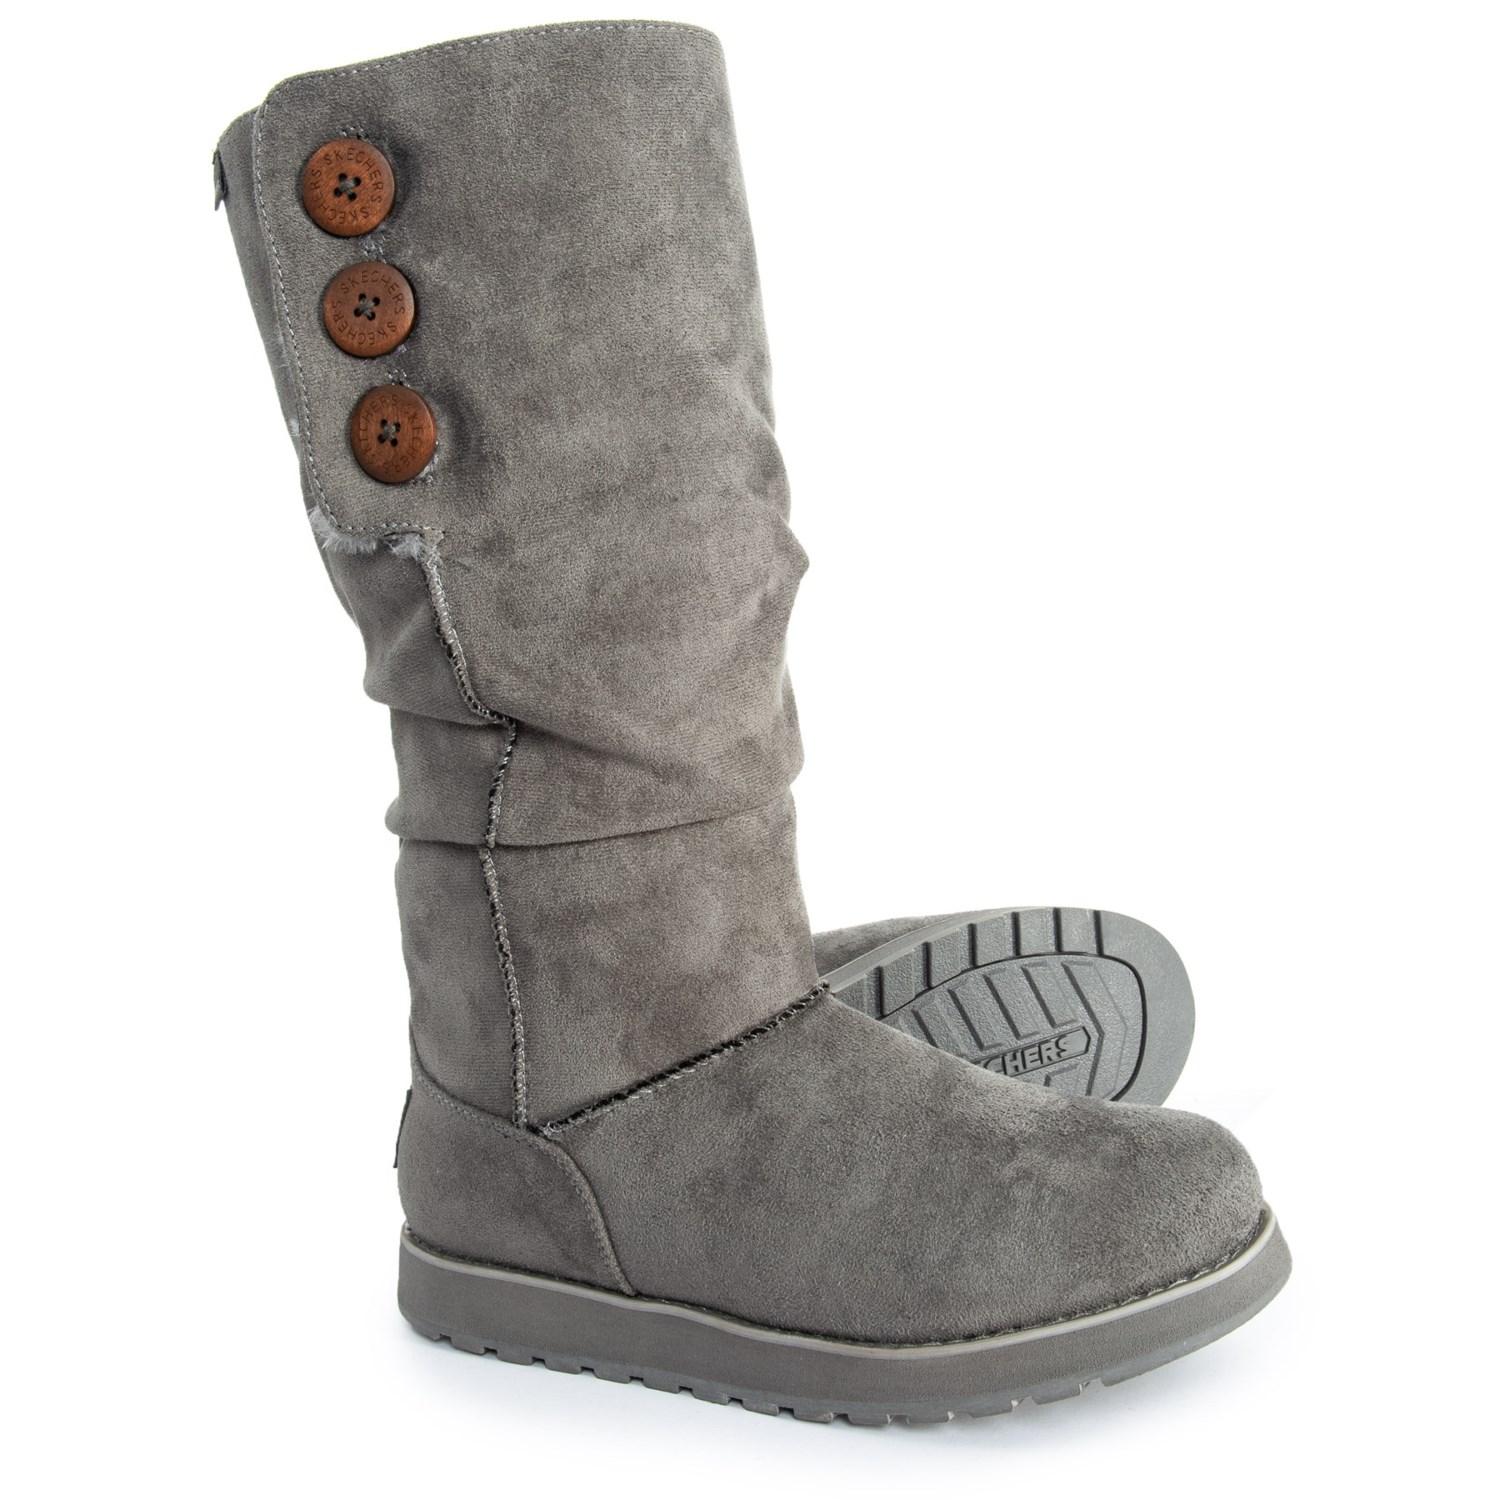 Skechers Tall 3-button Shearling Boots in Charcoal (Gray) - Lyst